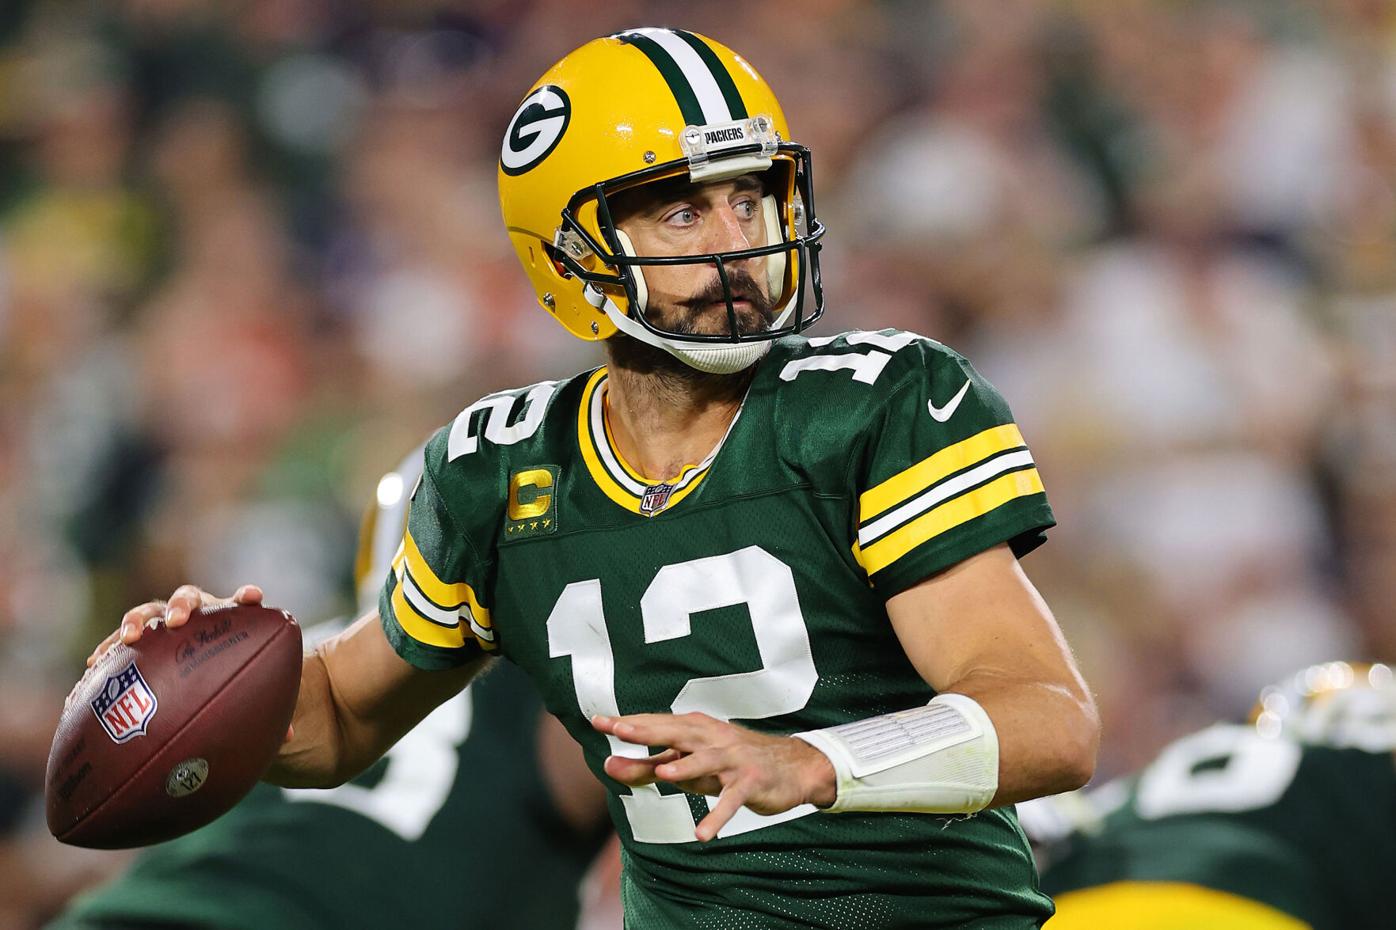 NFL star Aaron Rodgers went to a darkness retreat to contemplate his future